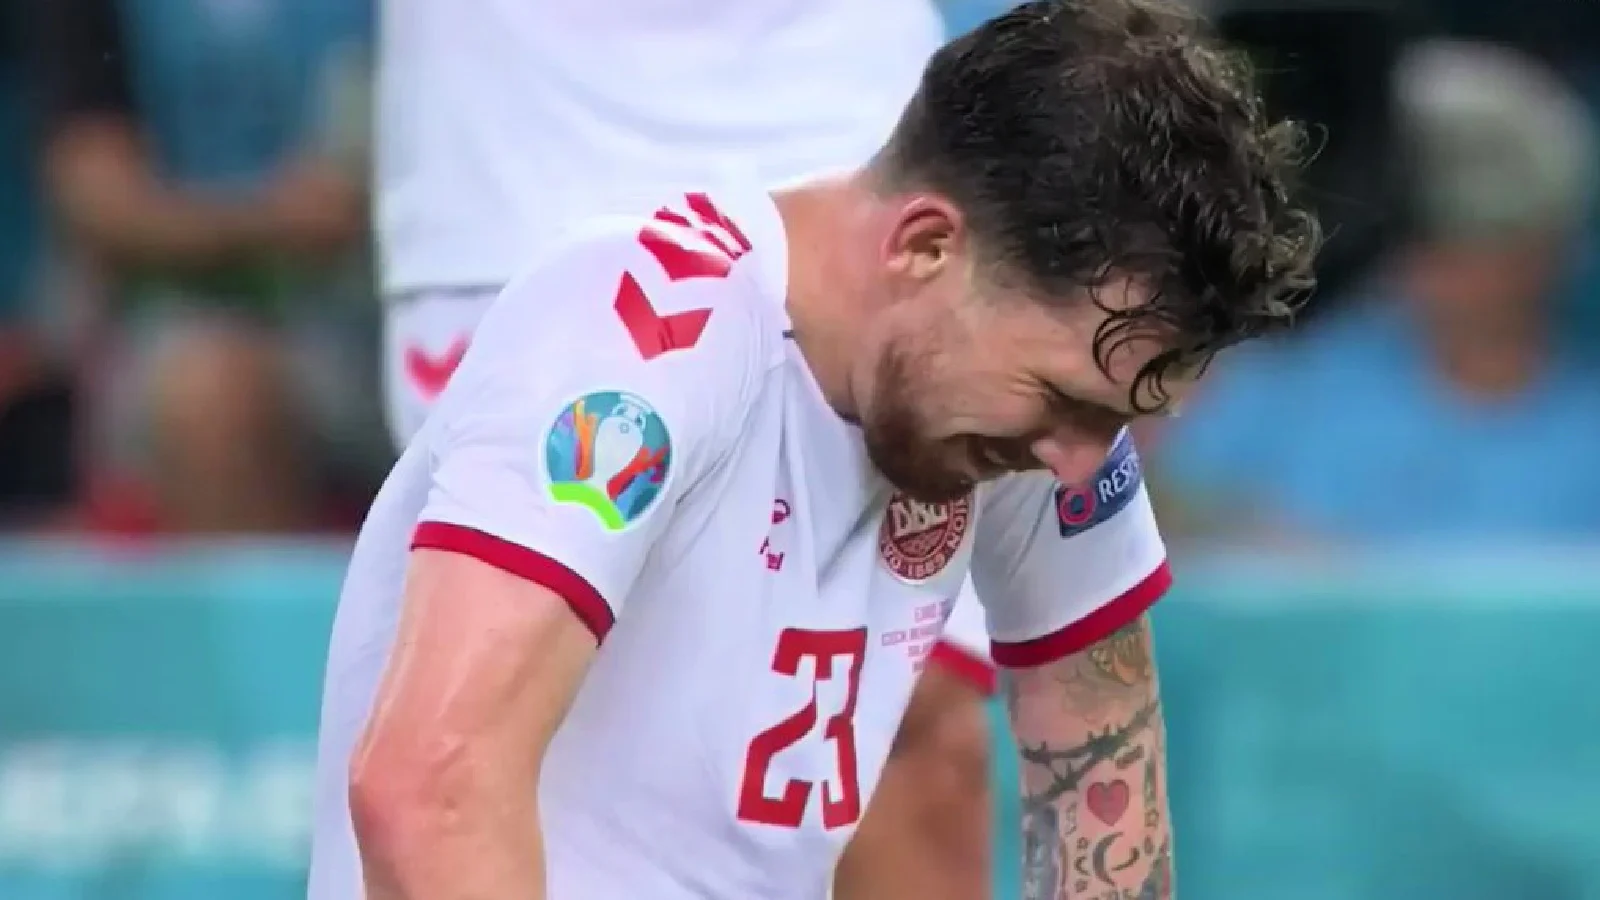 Pierre-Emile Hojbjerg overcome with emotions after Denmark win against Czech Republic